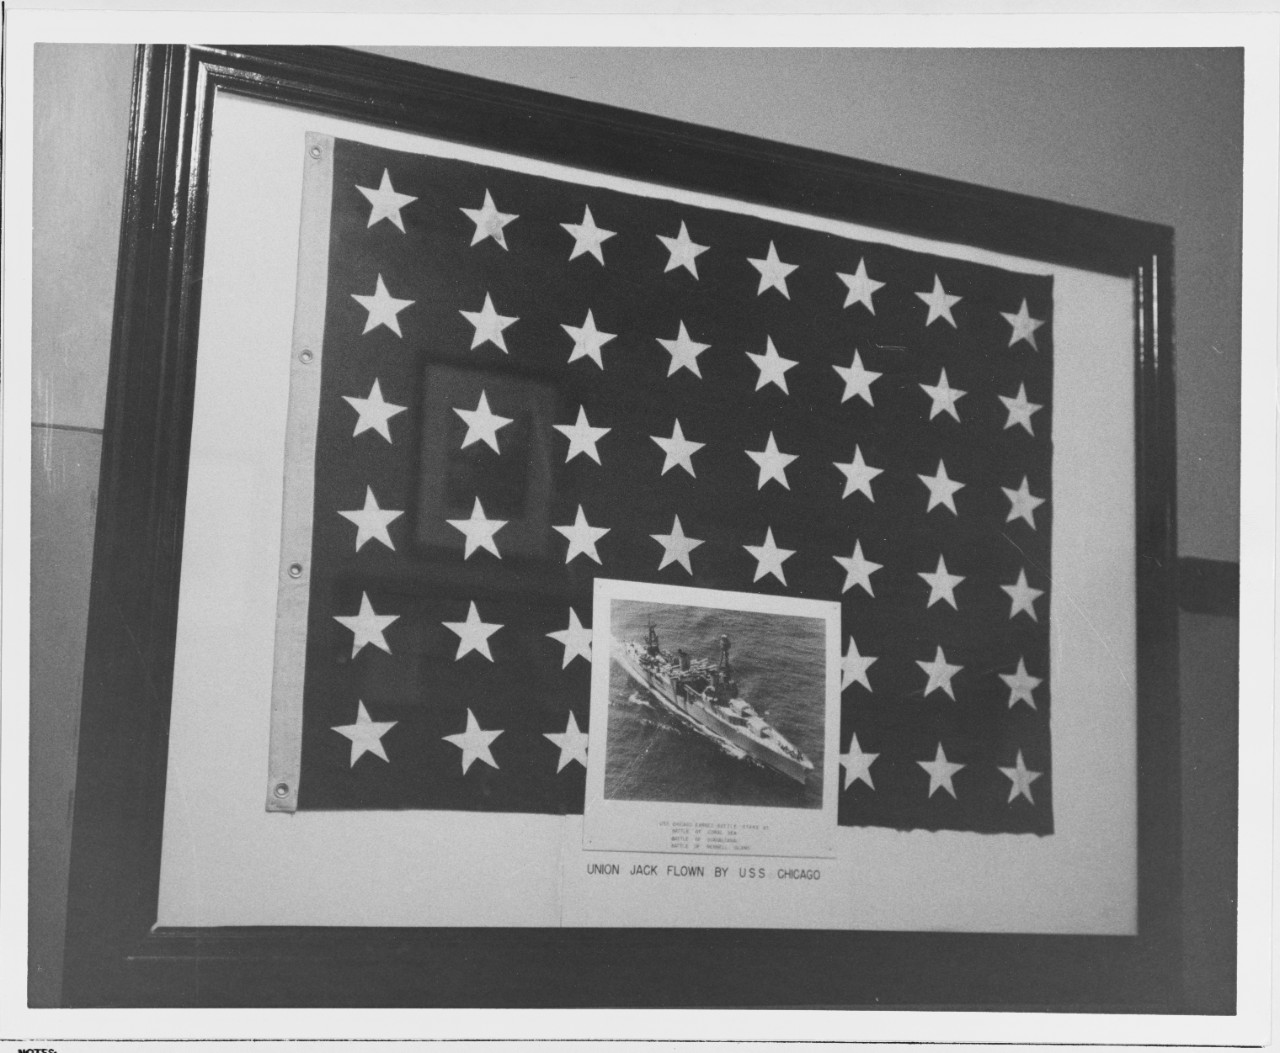 Union Jack Flown from USS CHICAGO (CA-29)